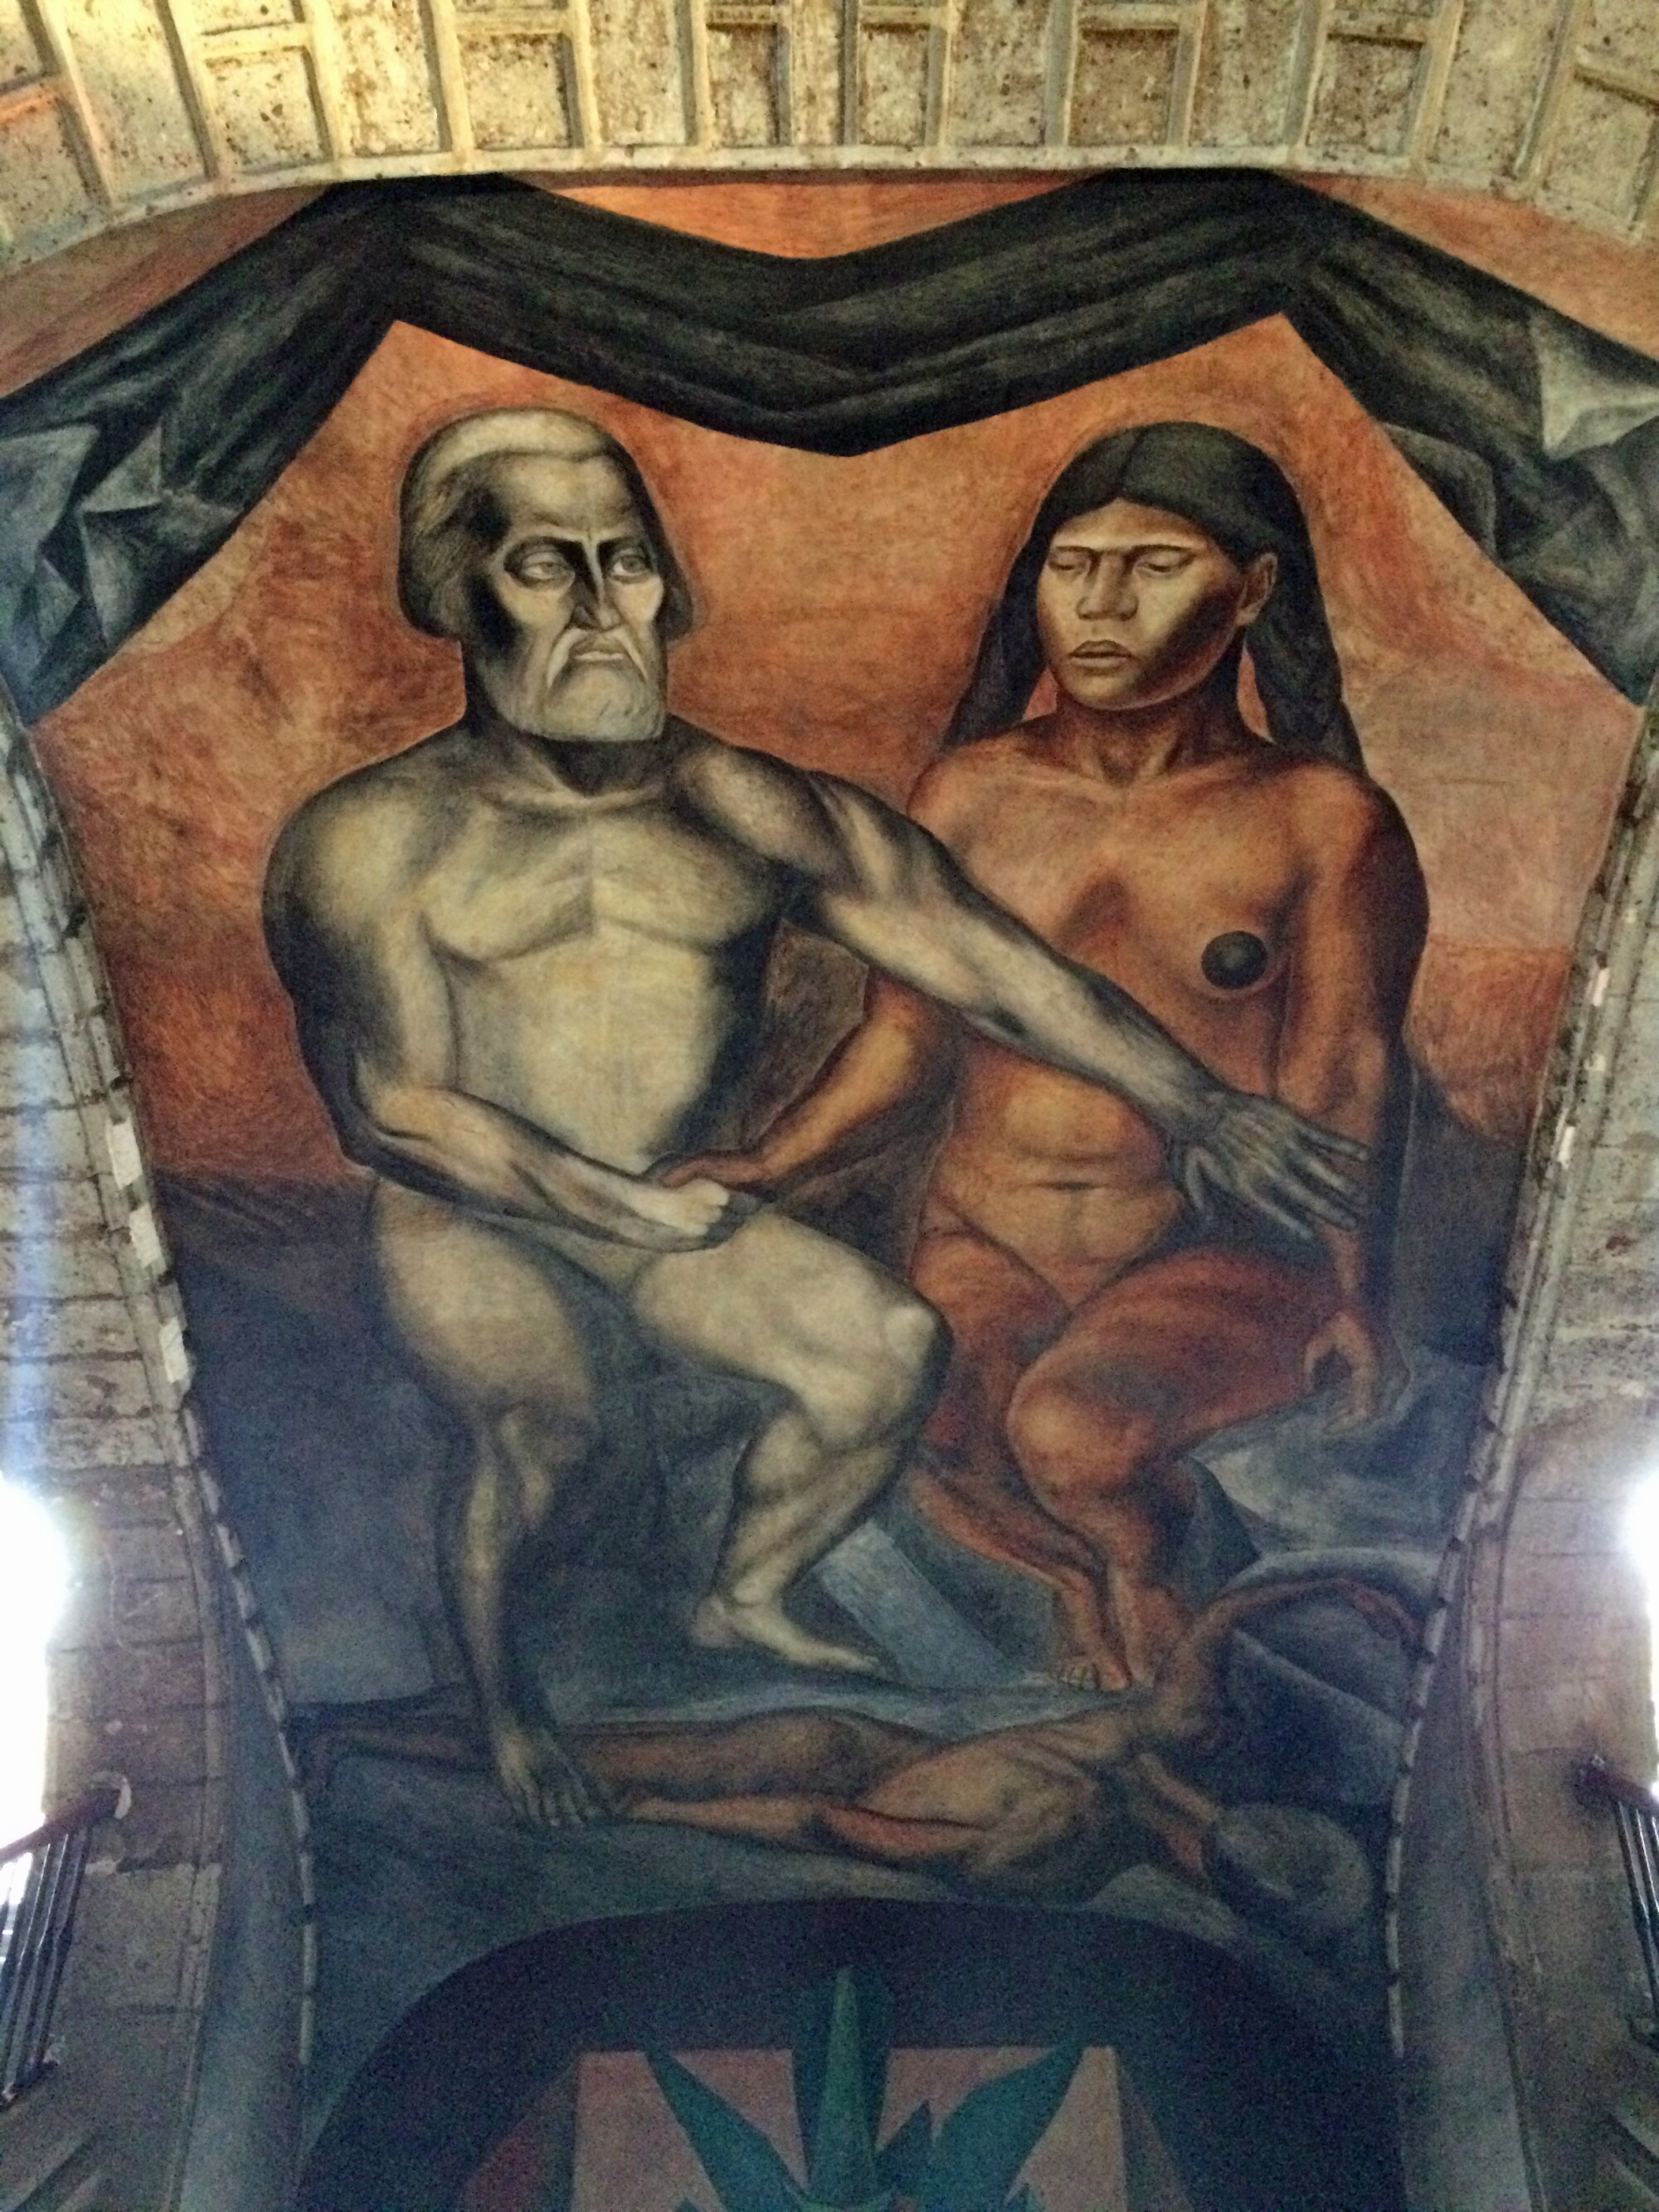 A mural shows a nude Hernán Cortés extending an arm before a nude, seated Malinche, who remains expressionless